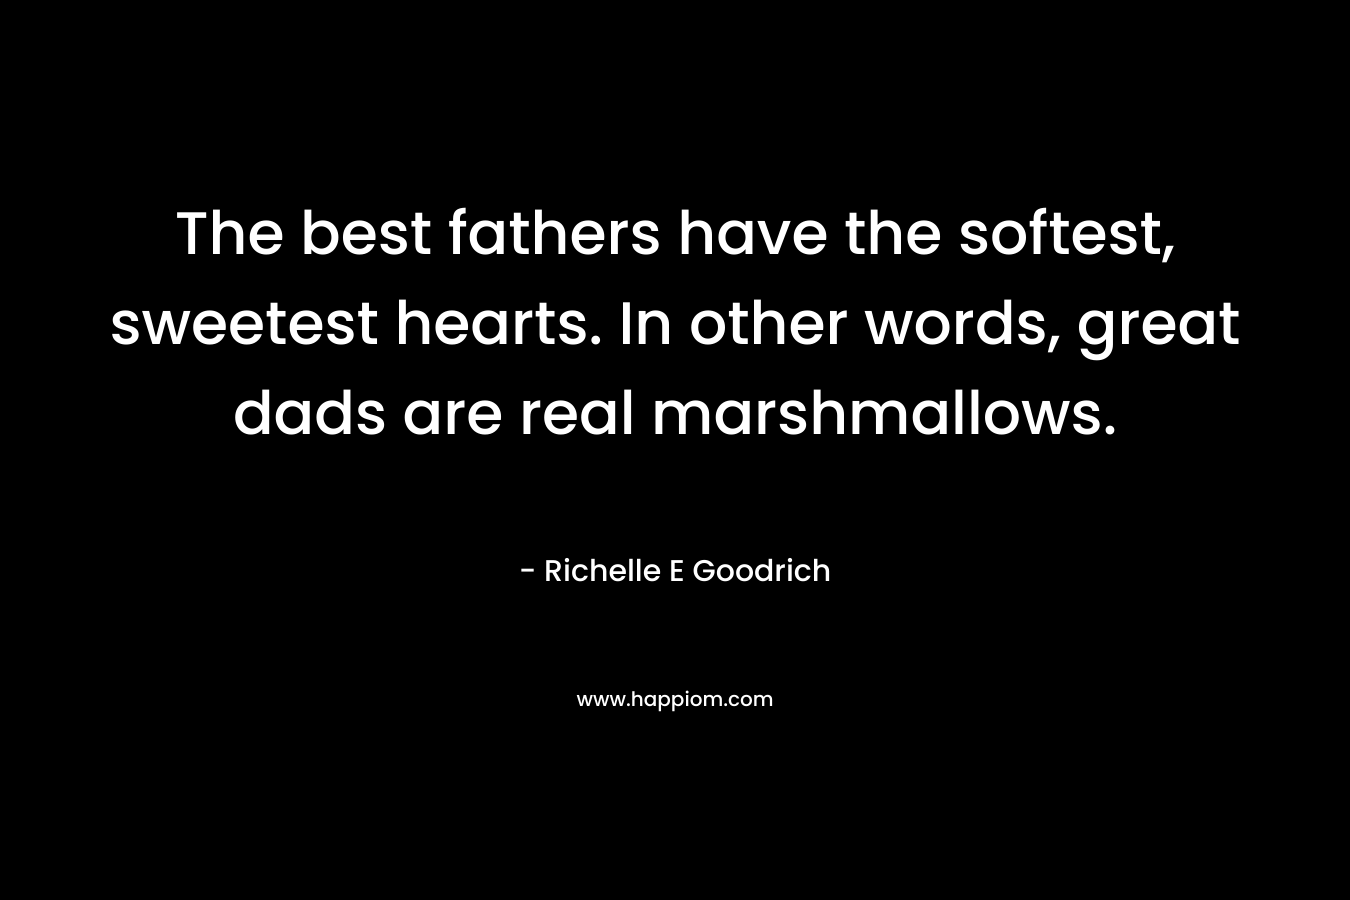 The best fathers have the softest, sweetest hearts. In other words, great dads are real marshmallows. – Richelle E Goodrich